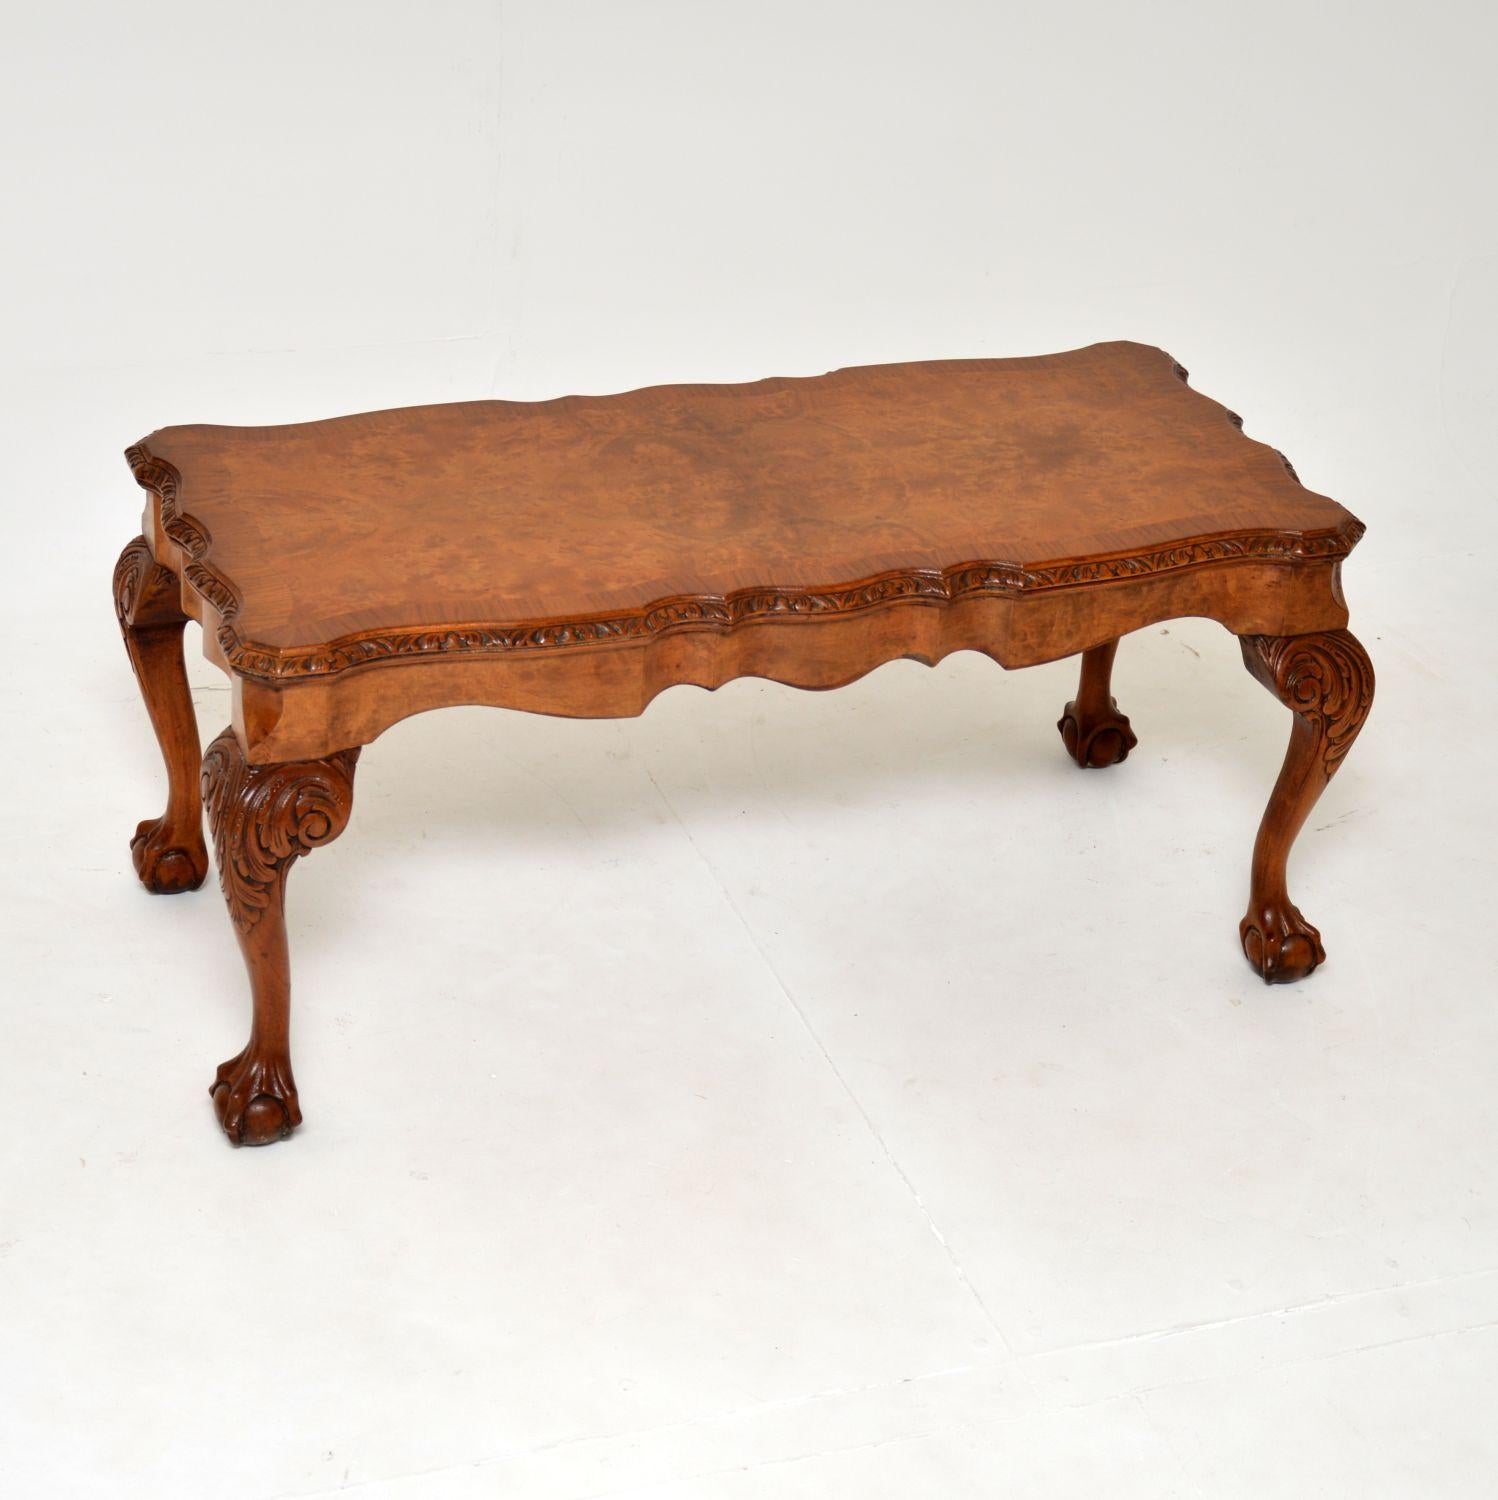 A stunning antique coffee table in burr walnut. This was made in England, it dates from the 1930’s.

It is of superb quality, with beautifully shaped and carved serpentine edges. The top has gorgeous burr walnut grain patterns with cross banded